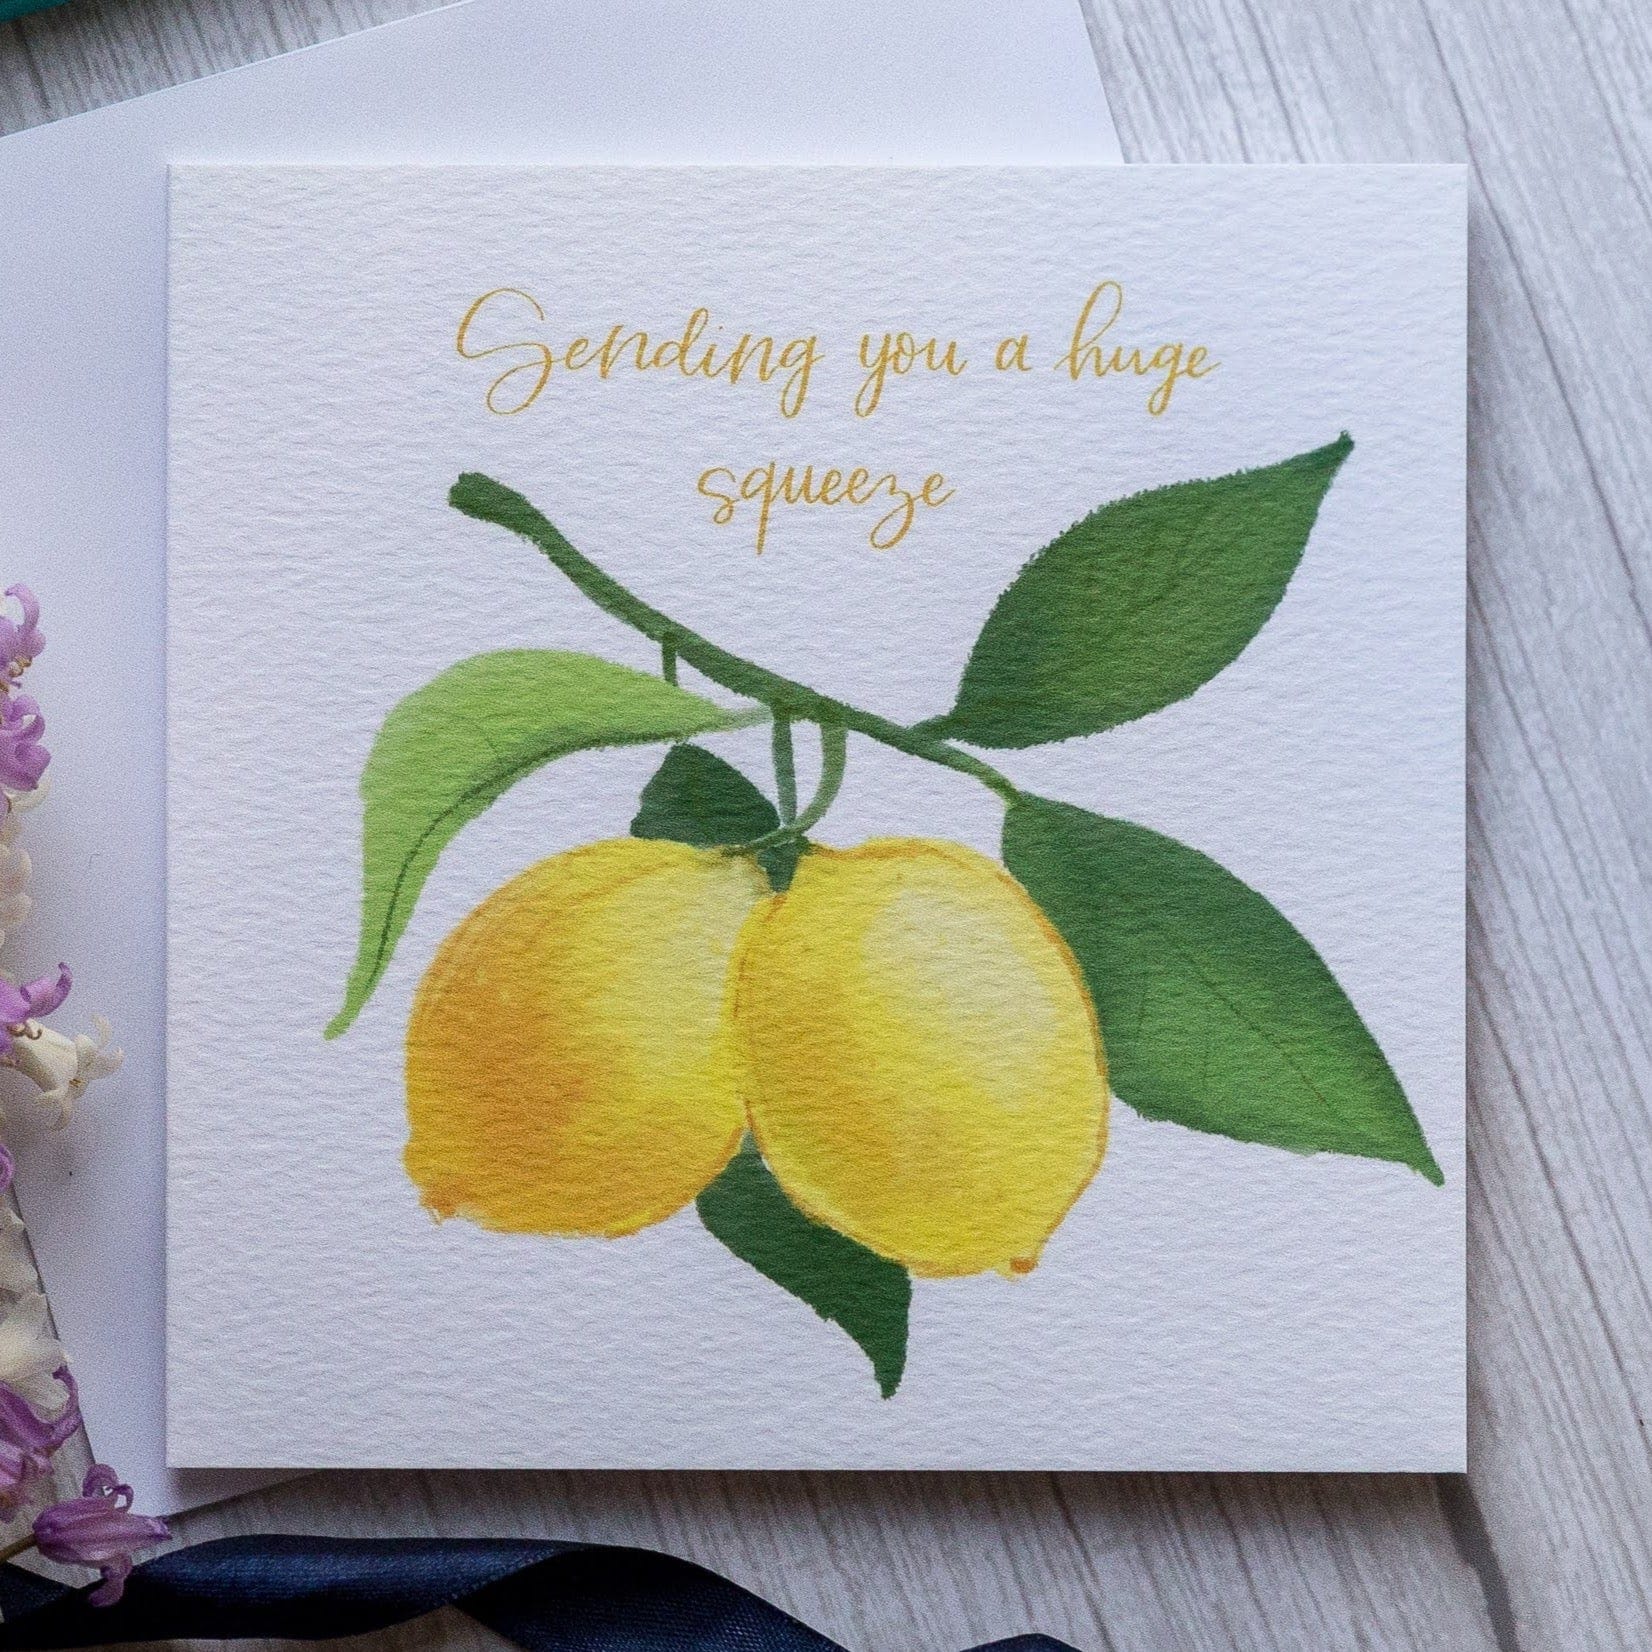 And Hope Designs Cards “Sending you a huge squeeze” lemon greeting card